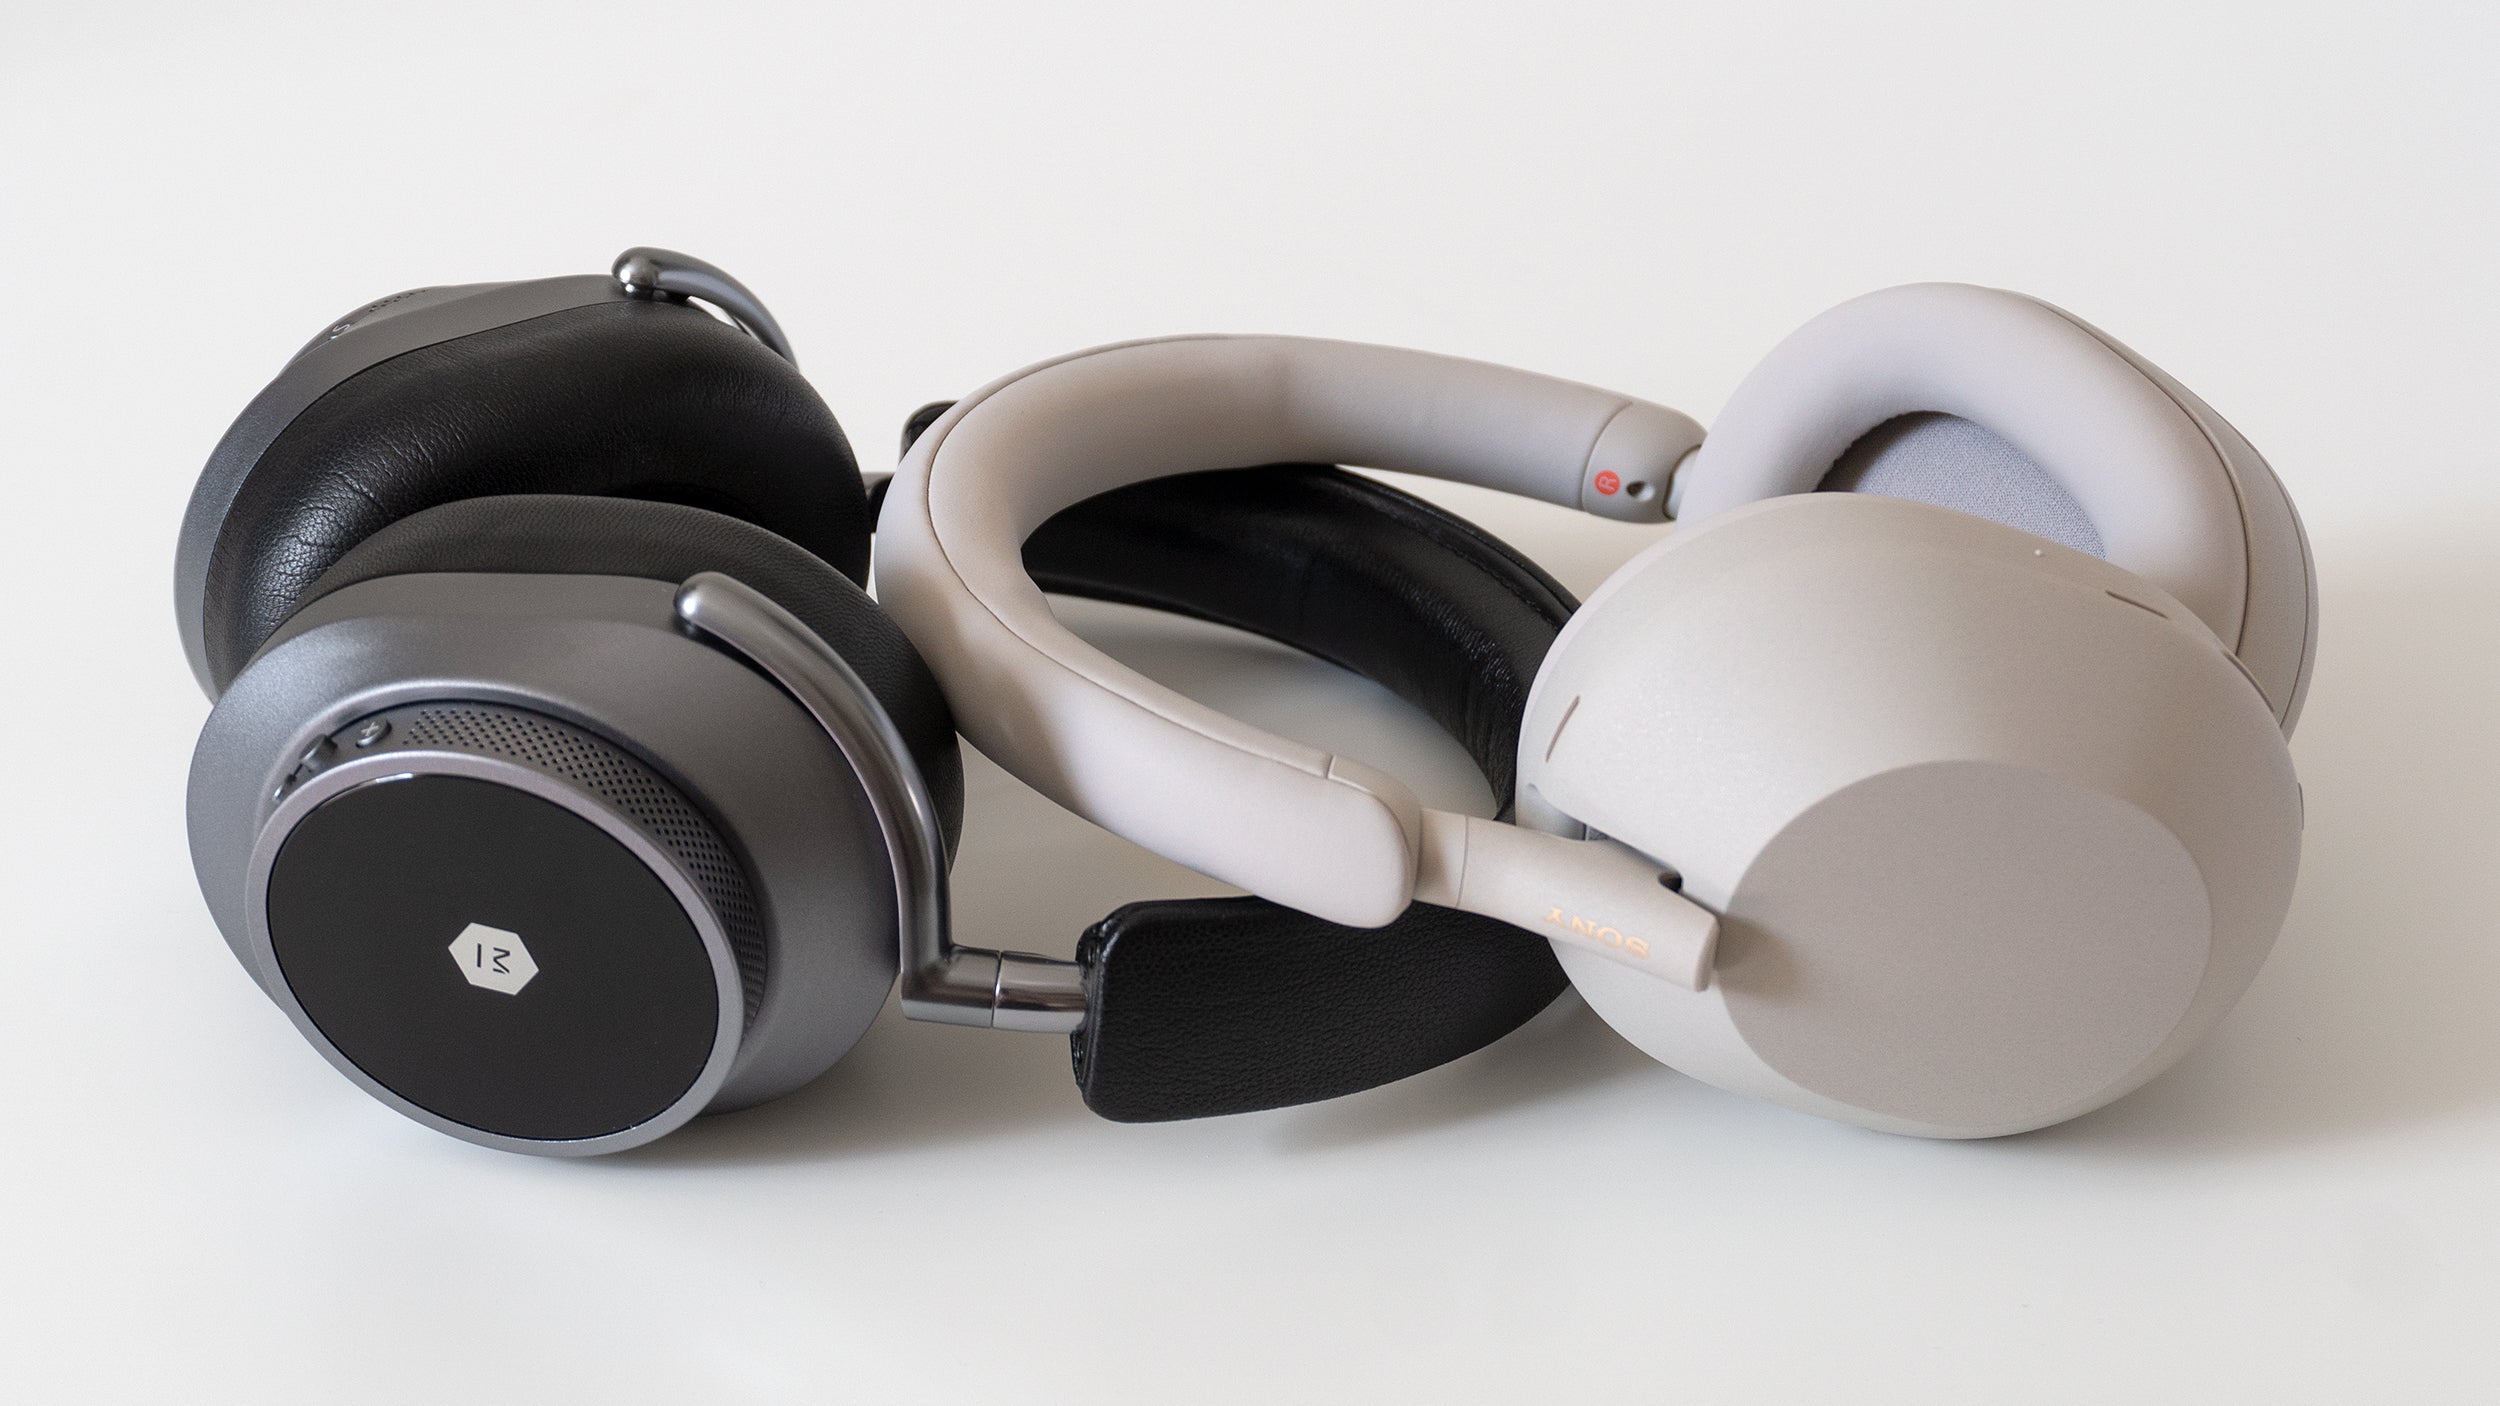 The ANC on the Master & Dynamic MW75s (left, bottom) can't compete with the extremely effective ANC on the Sony WH-1000XM5s (right, top). (Photo: Andrew Liszewski | Gizmodo)